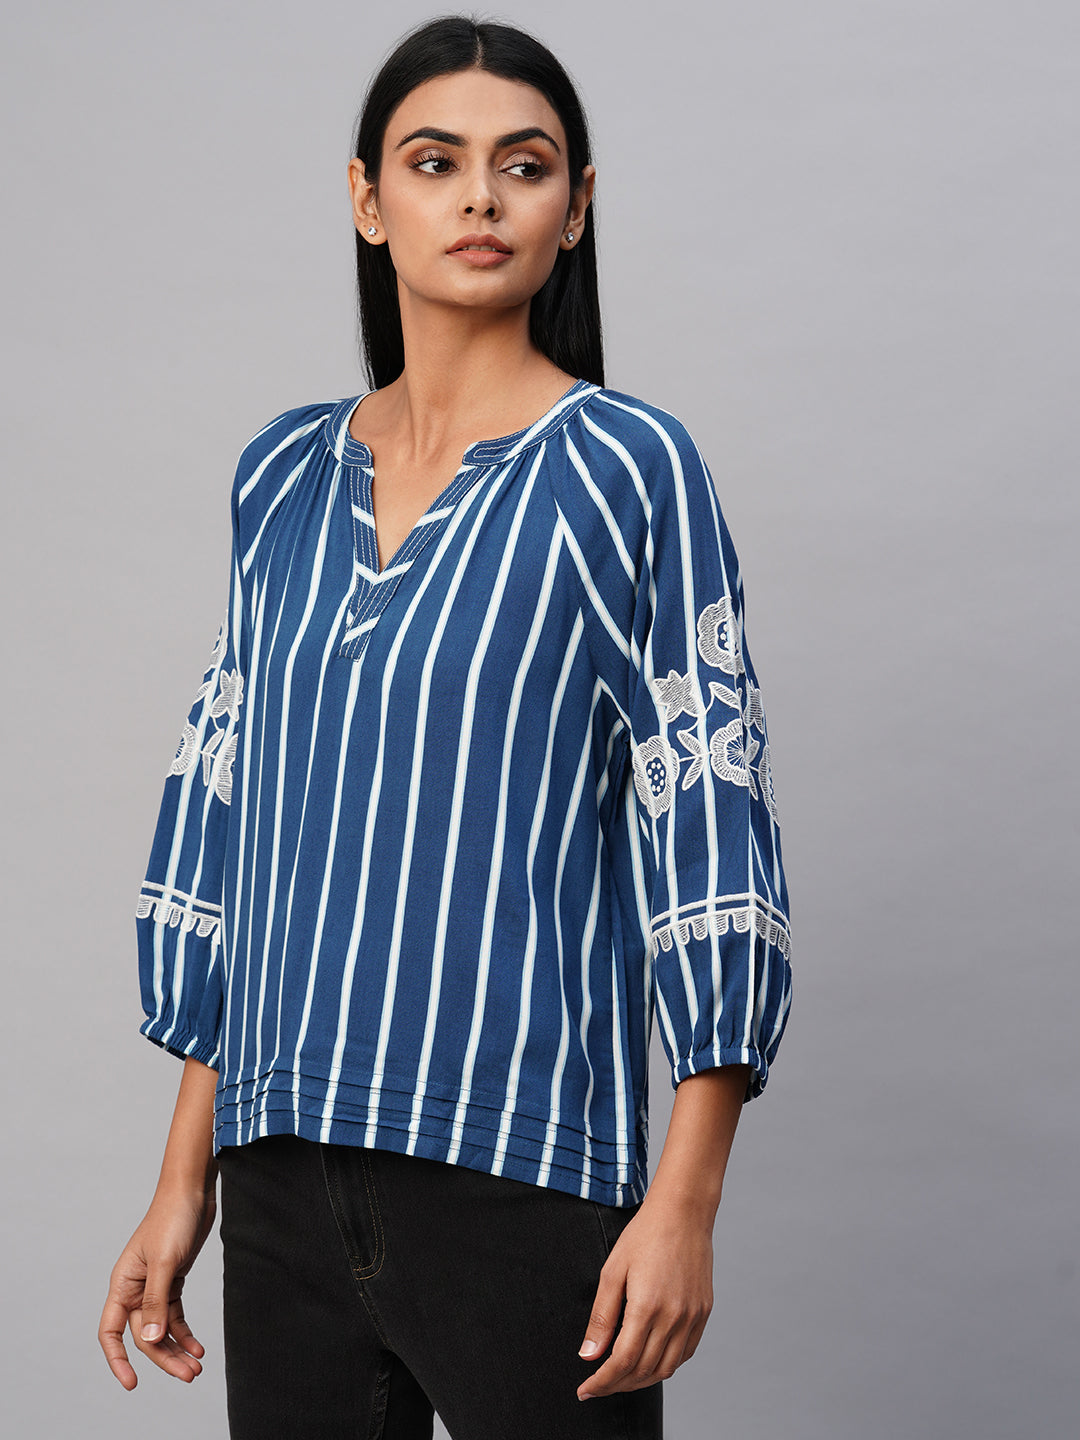 Printed Stripes Viscose Tunic Top W/ Embroidered Sleeves